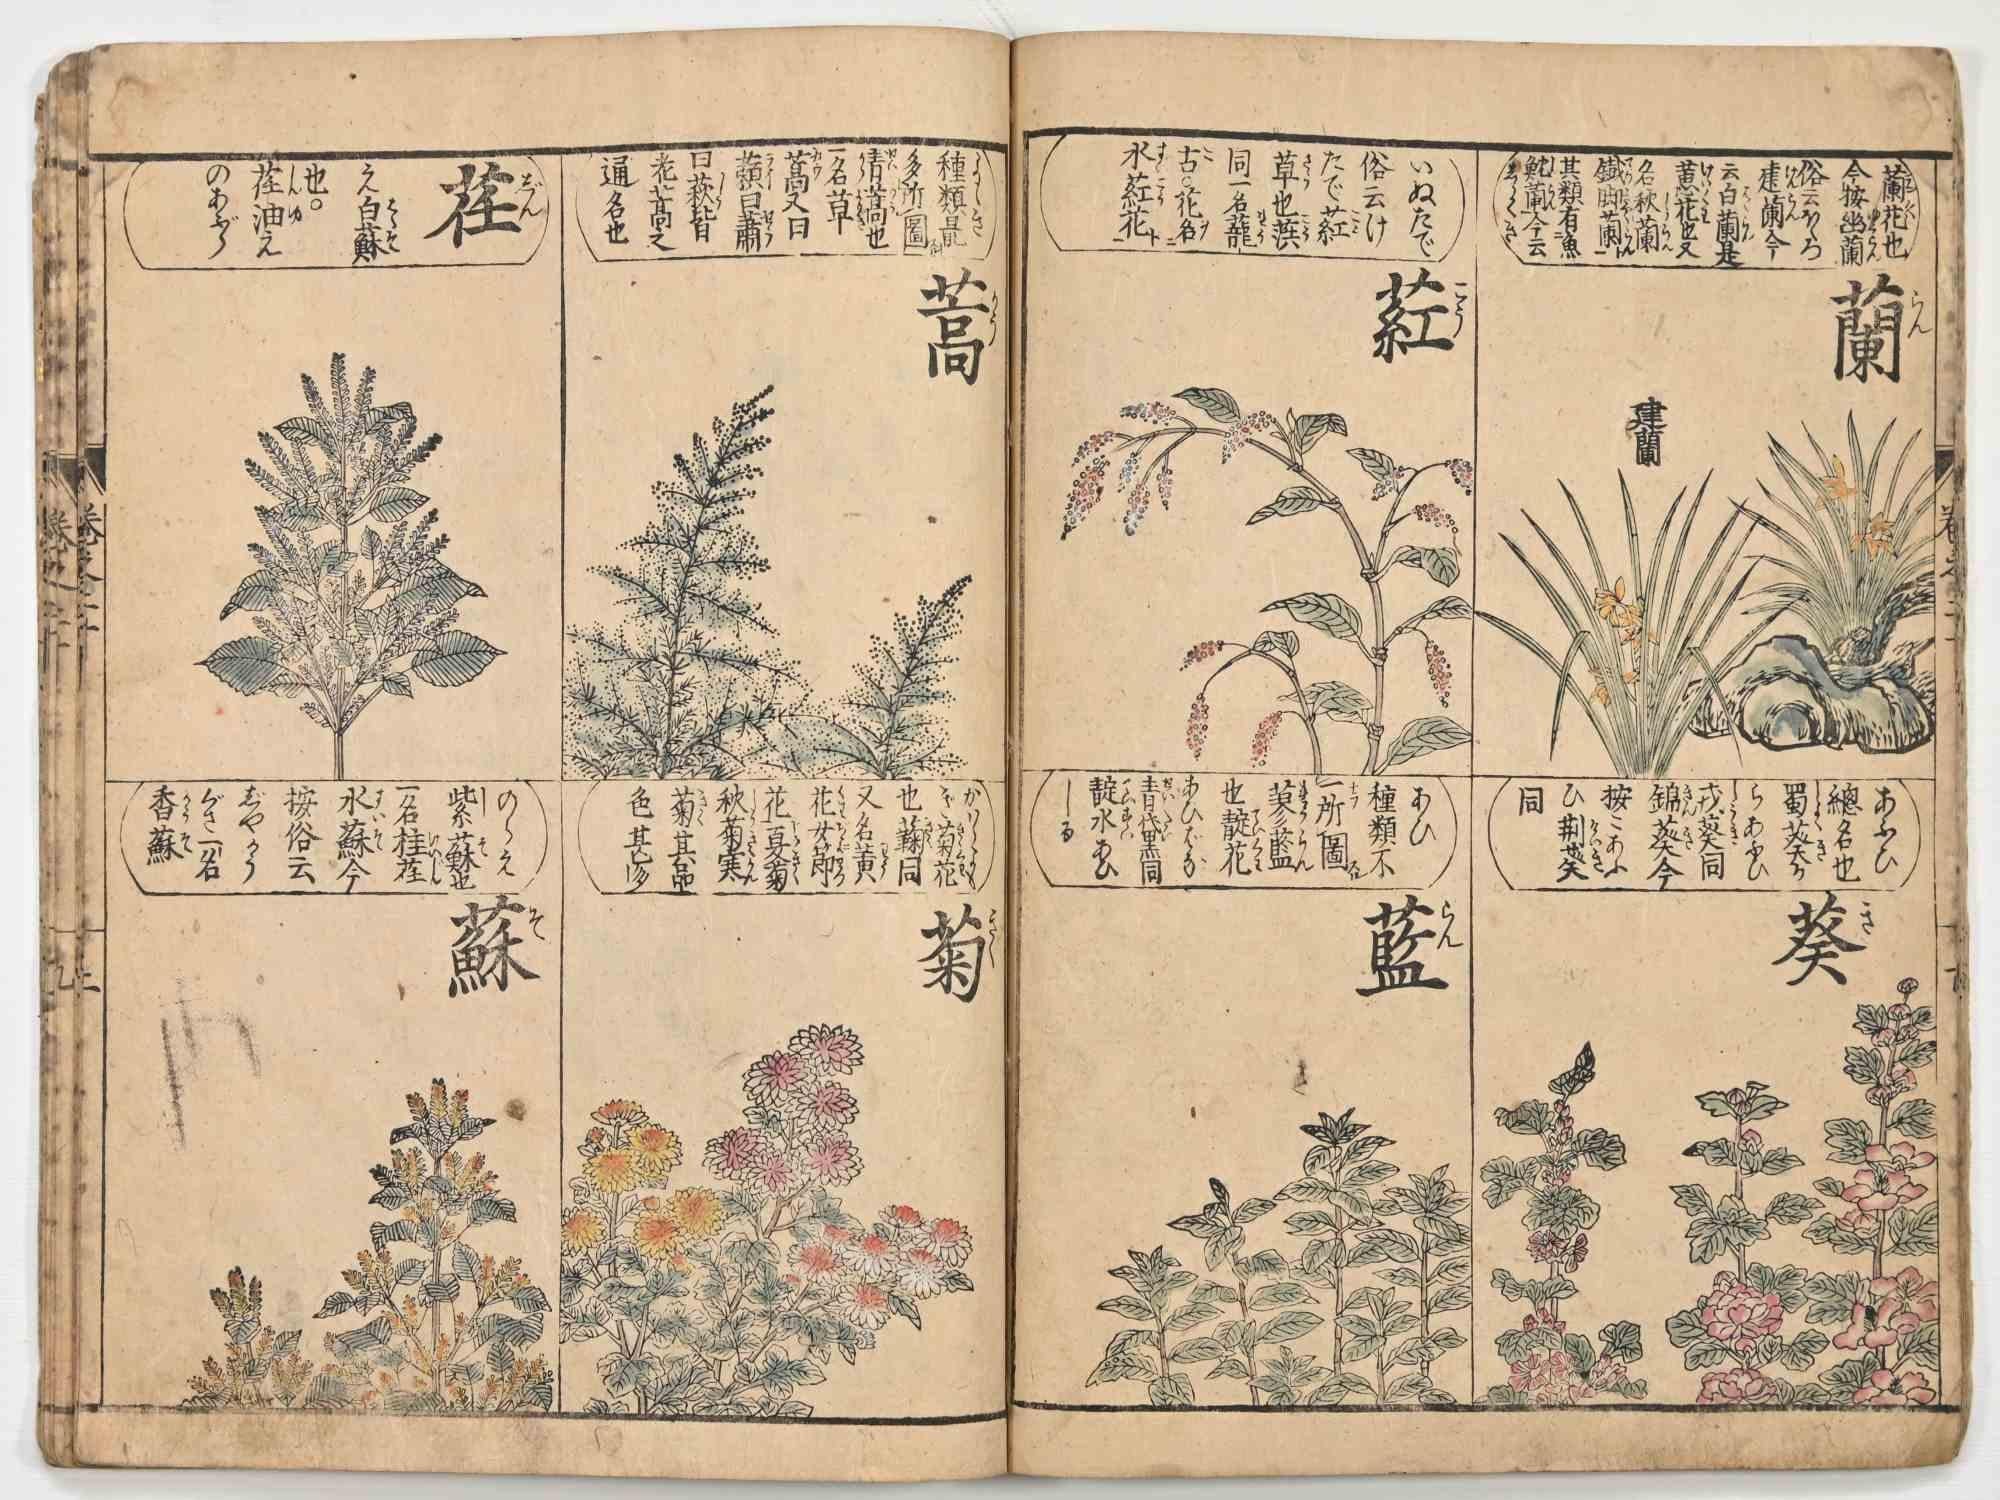 Chinese Herbal Book - Rare Illustrated Book - 19th century - Modern Print by Unknown